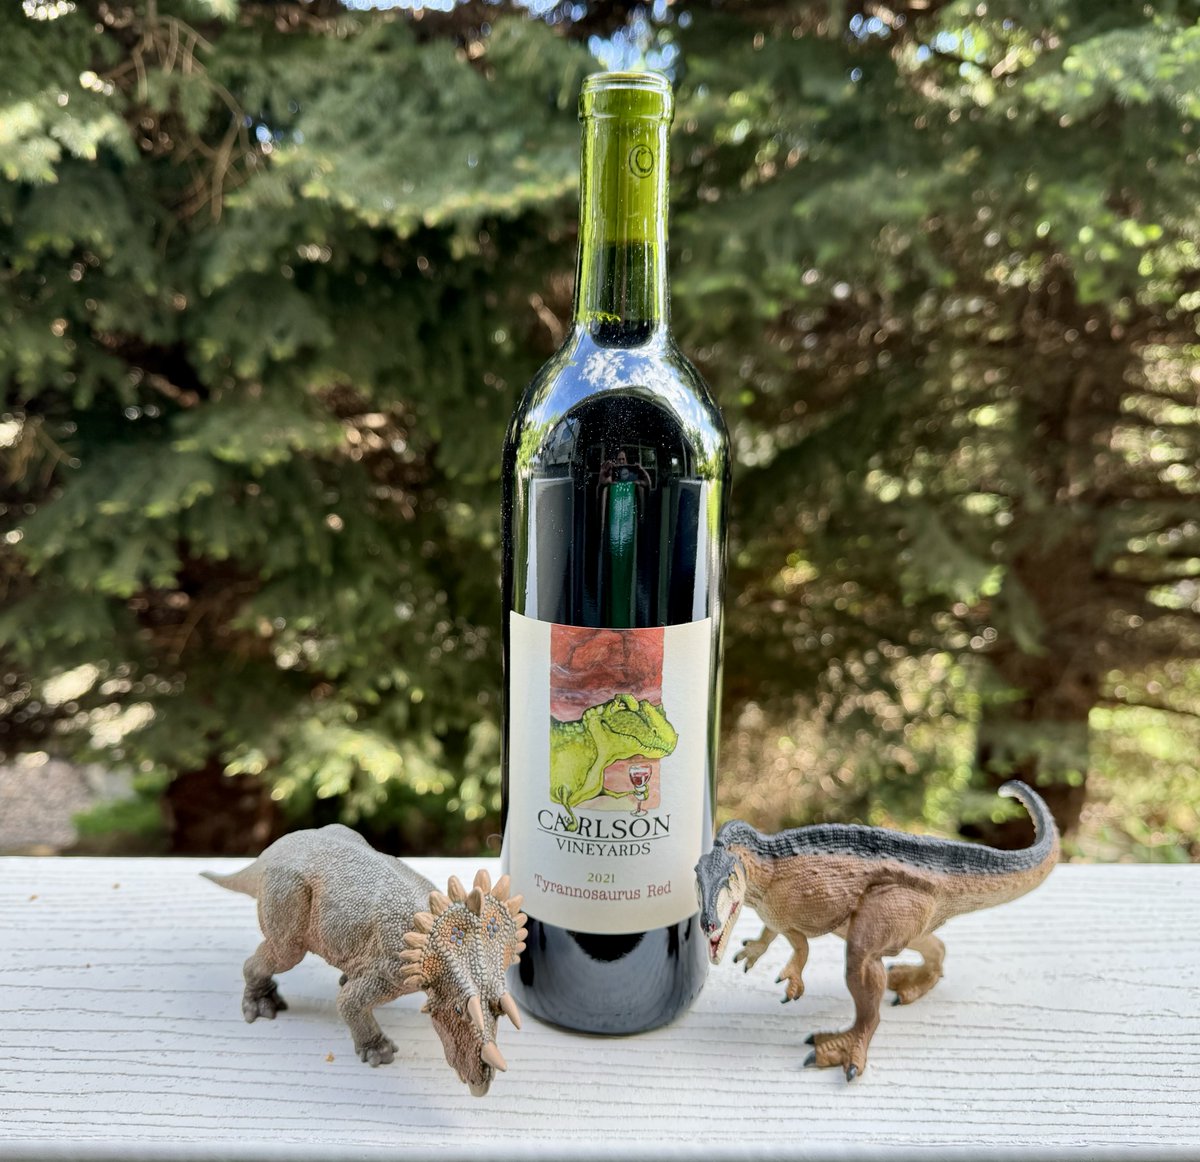 Cheers on this #NationalWineDay & thanks to #CarlsonVineyards of #PalisadeColorado for providing the Gewürztraminer & #Tyrannosaurus Red for our gala this year! Delicious & dinosaur approved. Thanks also to beverage sponsors #USbank #ColoradoGeologicalSurvey & #SmoothAlpacas 🍷